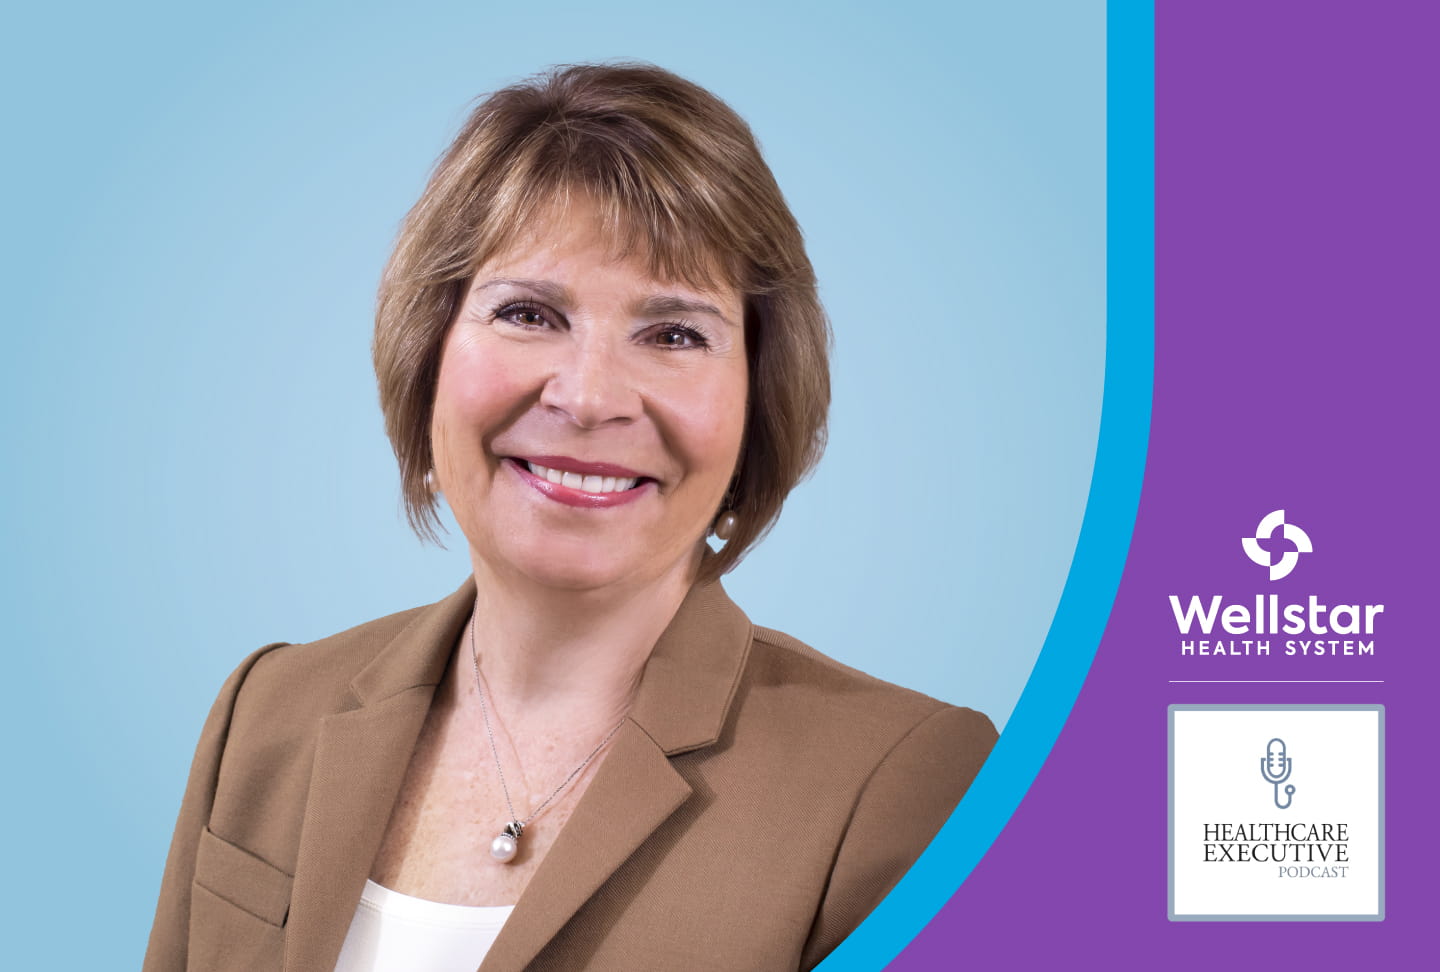 Headshot photo of Jill Case-Wirth. Wellstar and Healthcare Executive podcast logos.